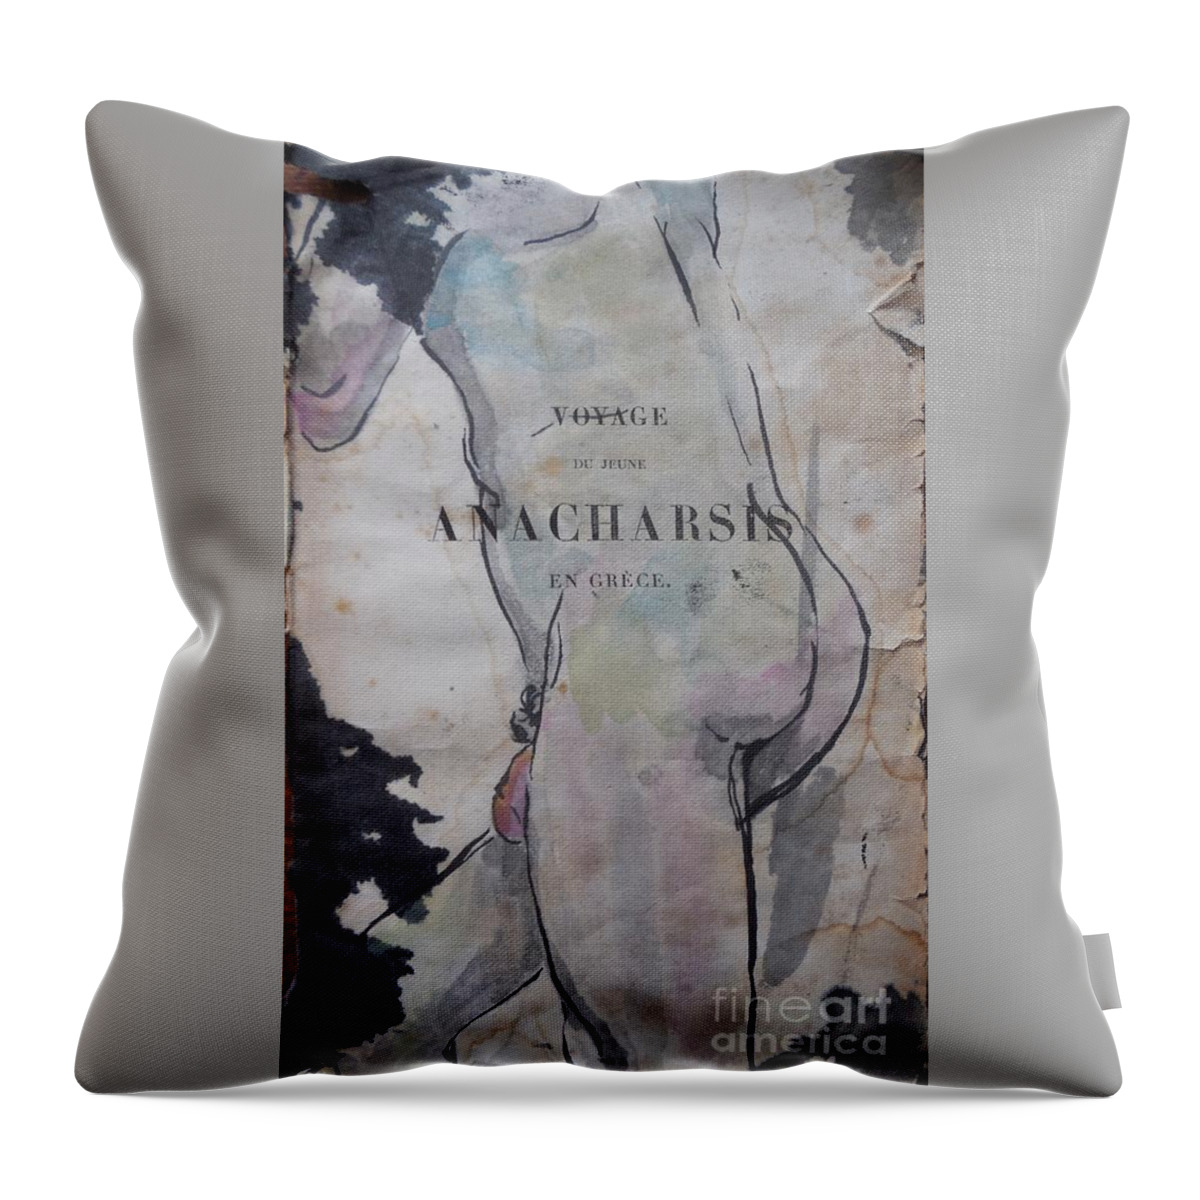 Male Nude Throw Pillow featuring the drawing Voyage du jeu anacharsis by M Bellavia